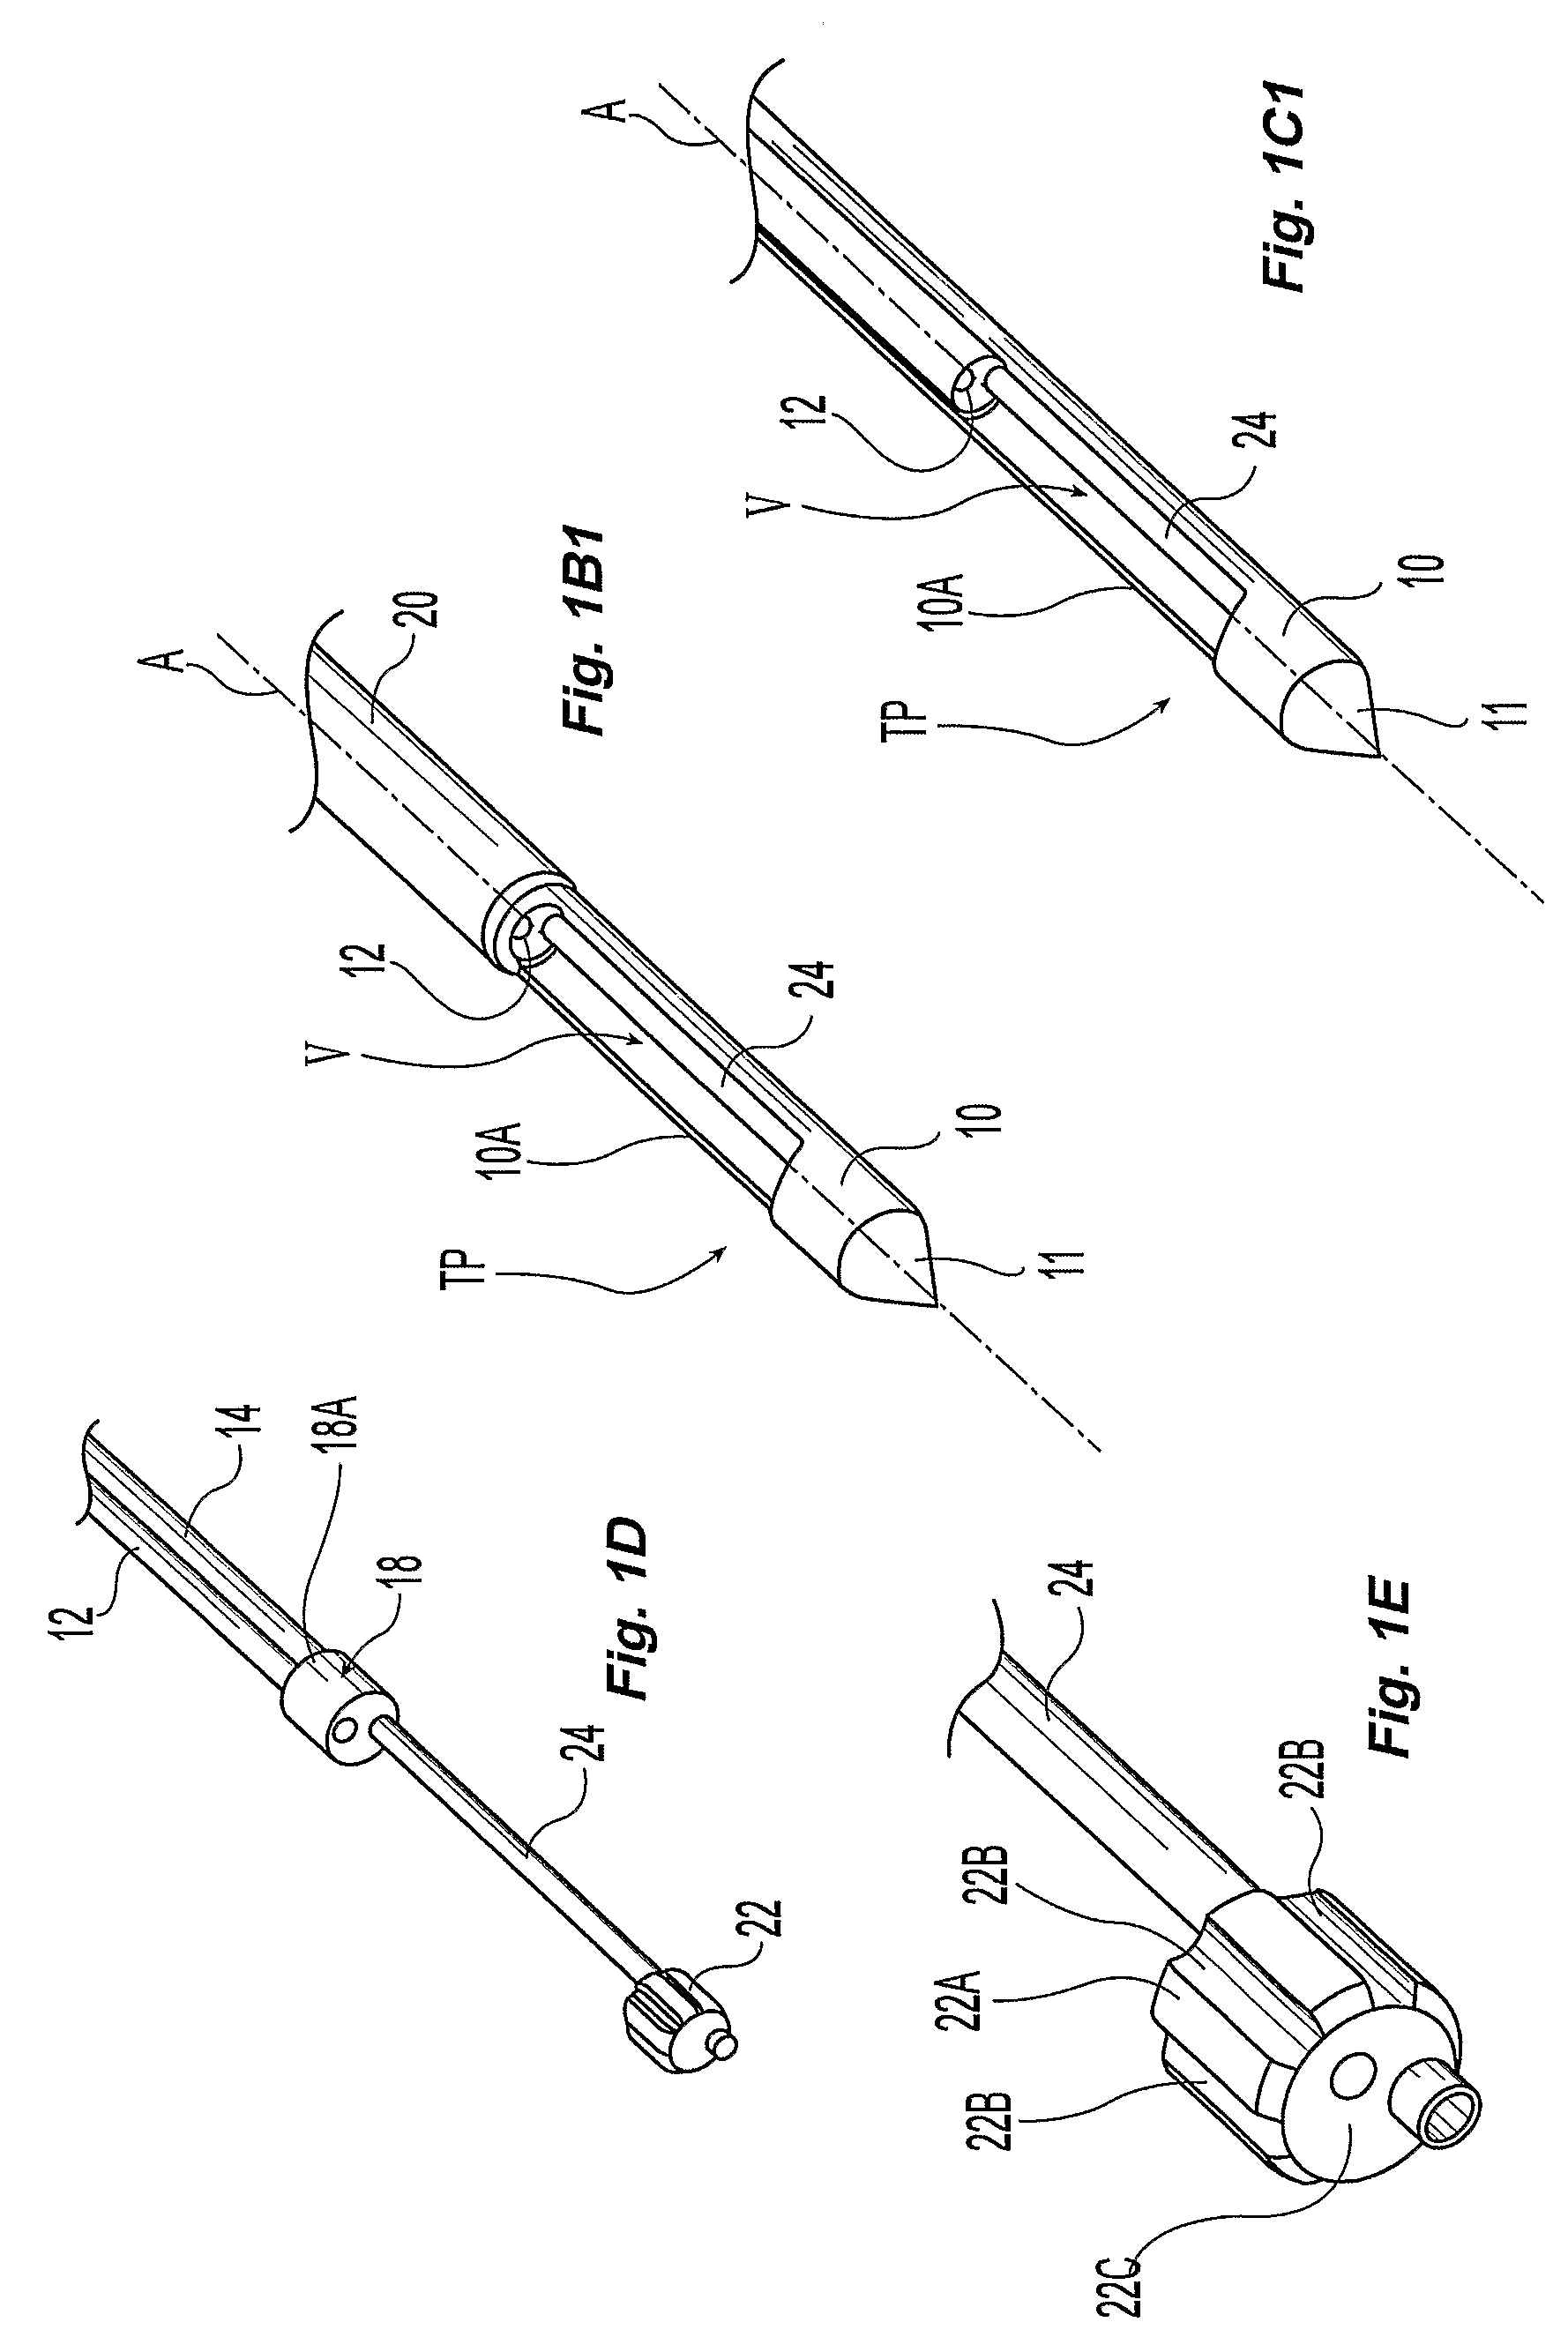 Single-insertion, multiple sample biopsy device with integrated markers